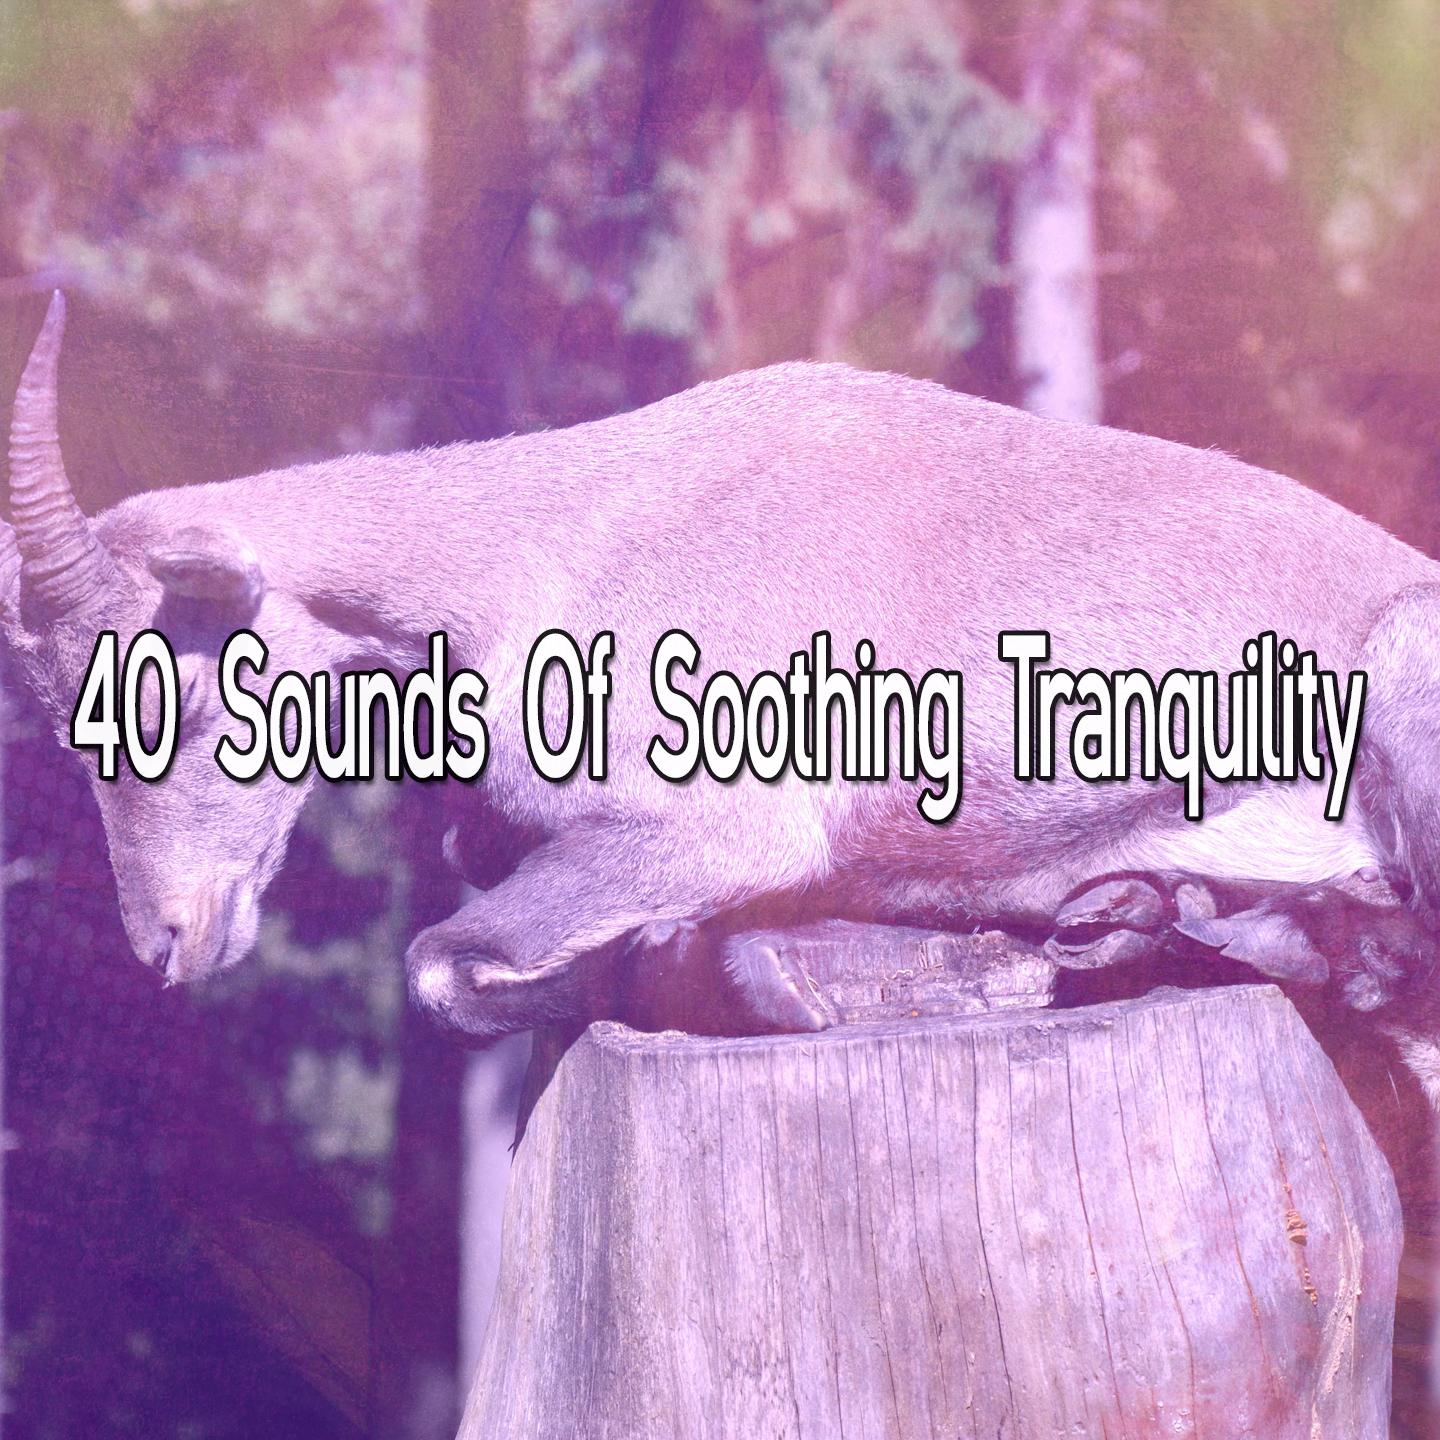 40 Sounds of Soothing Tranquility